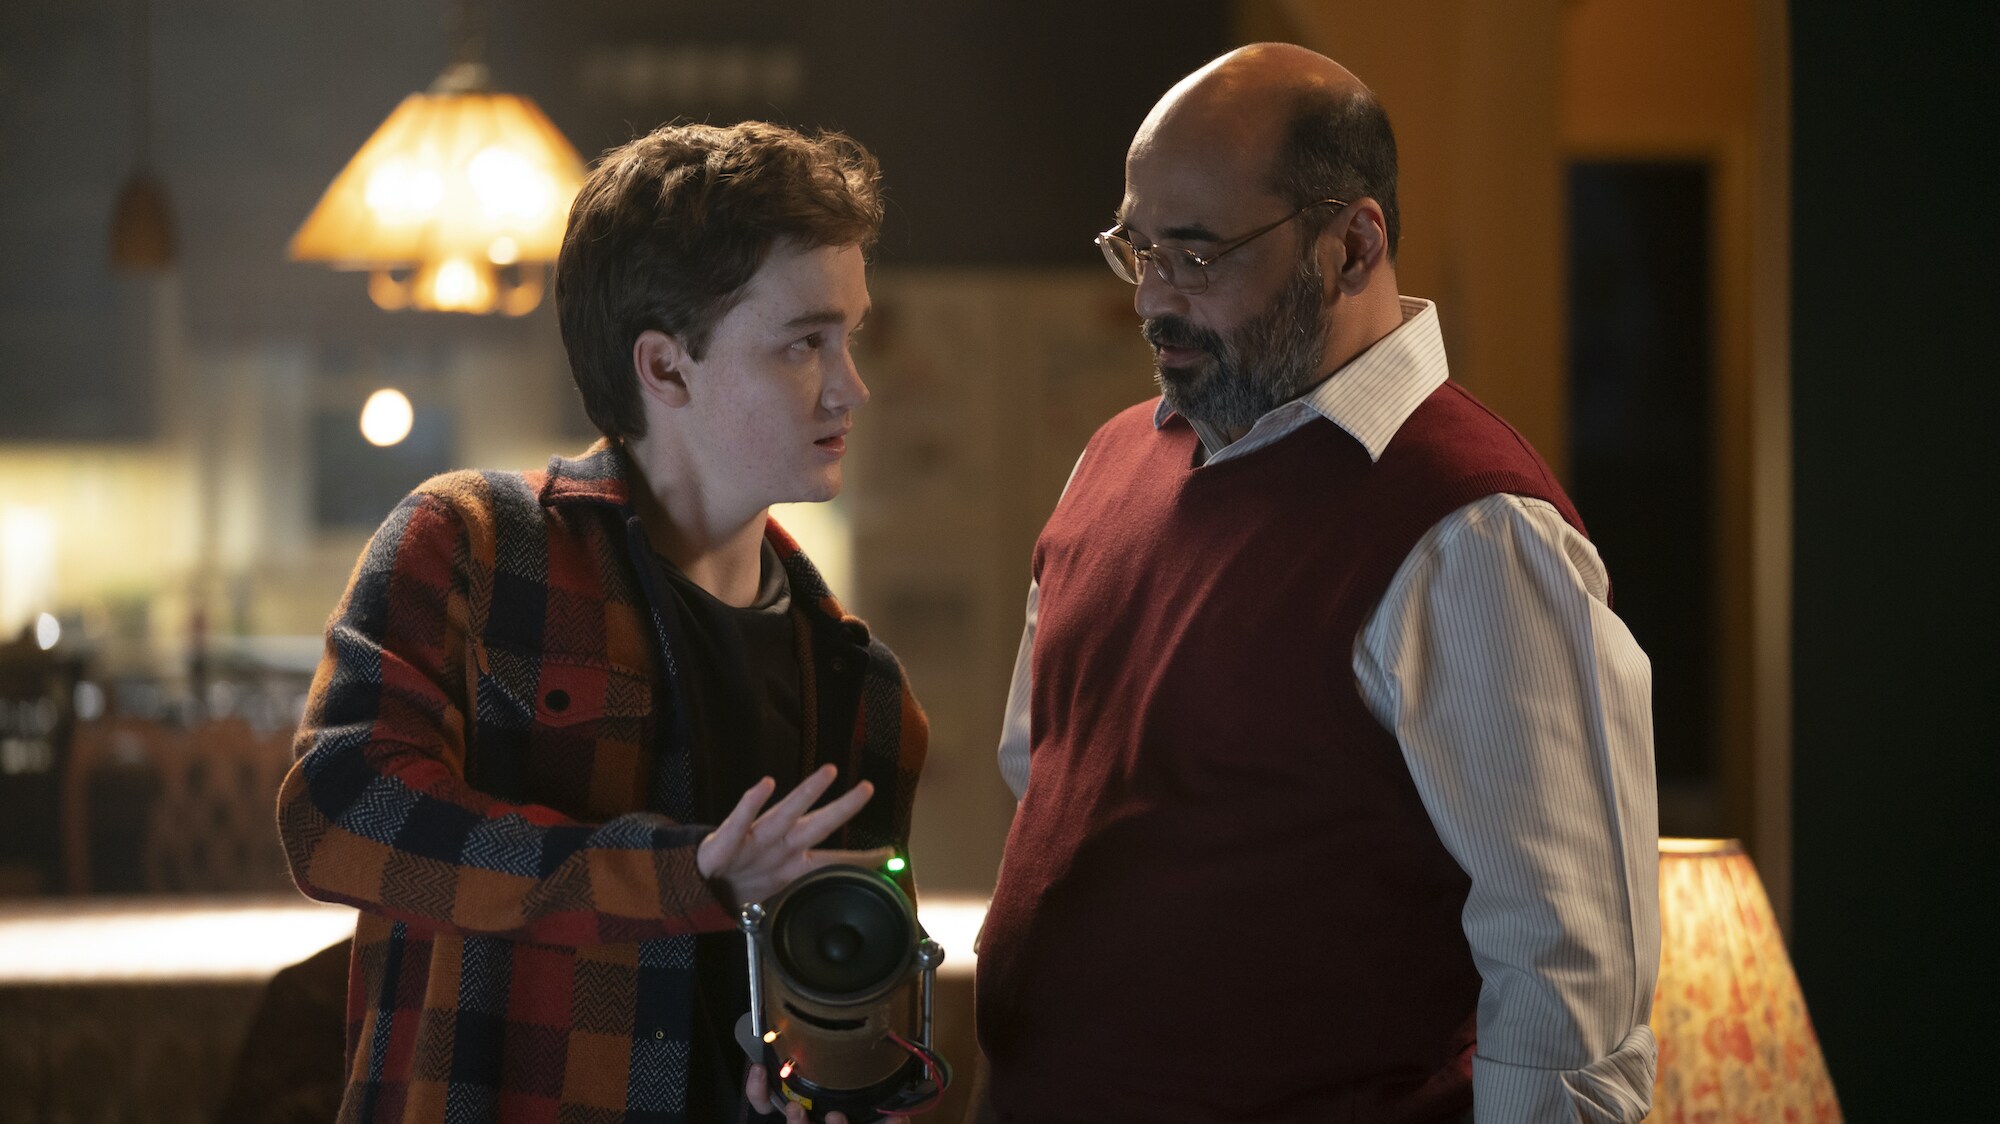 (L-R): Matt Lintz as Bruno and Mohan Kapur as Yusuf in Marvel Studios' MS. MARVEL, exclusively on Disney+. Photo by Daniel McFadden. ©Marvel Studios 2022. All Rights Reserved.